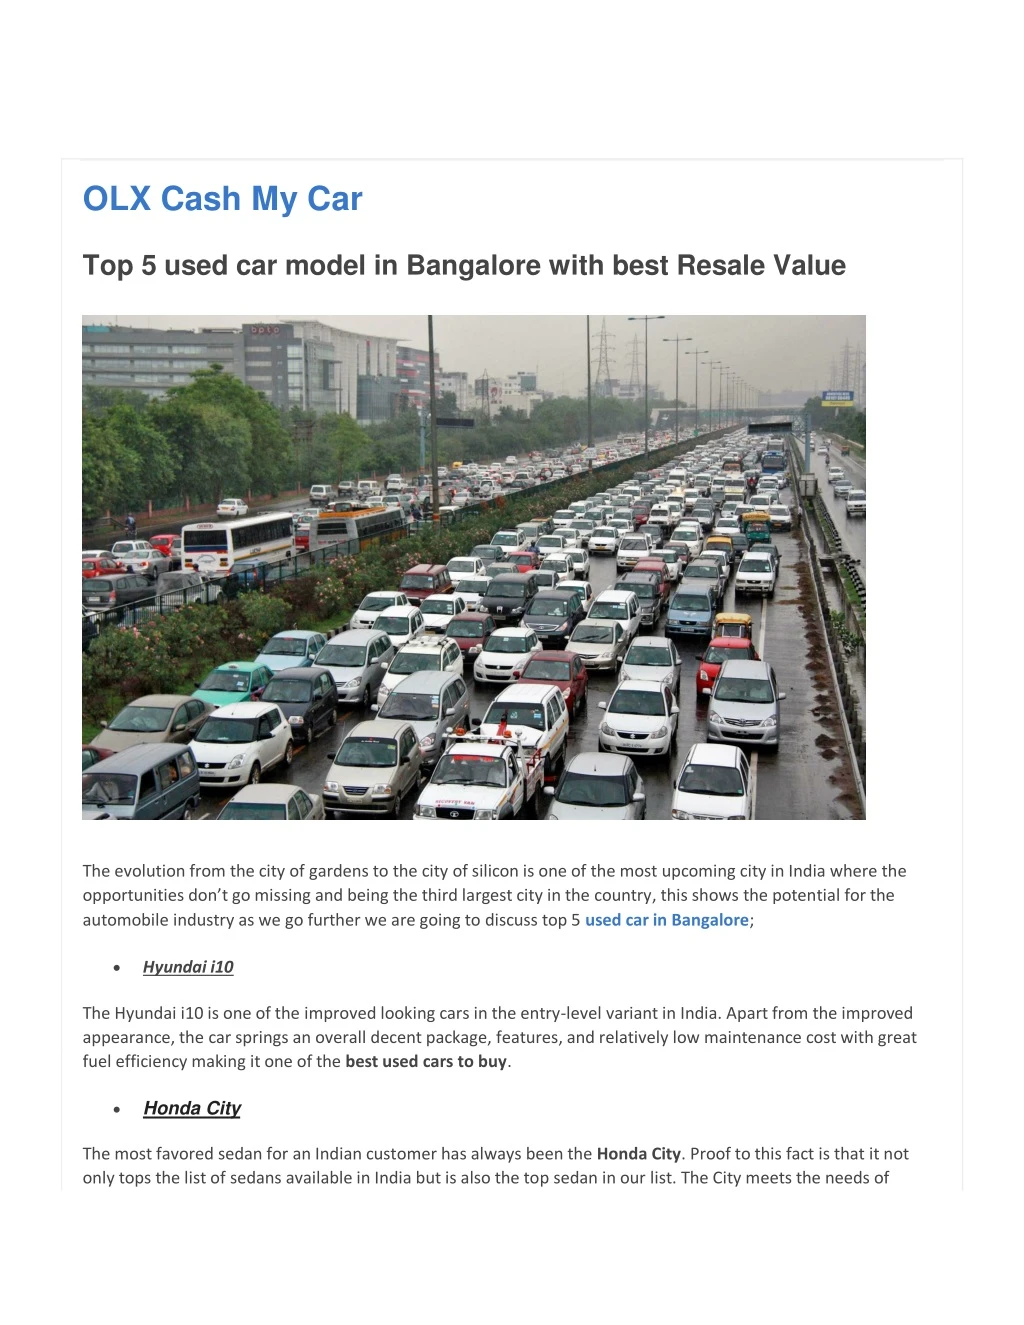 olx cash my car top 5 used car model in bangalore